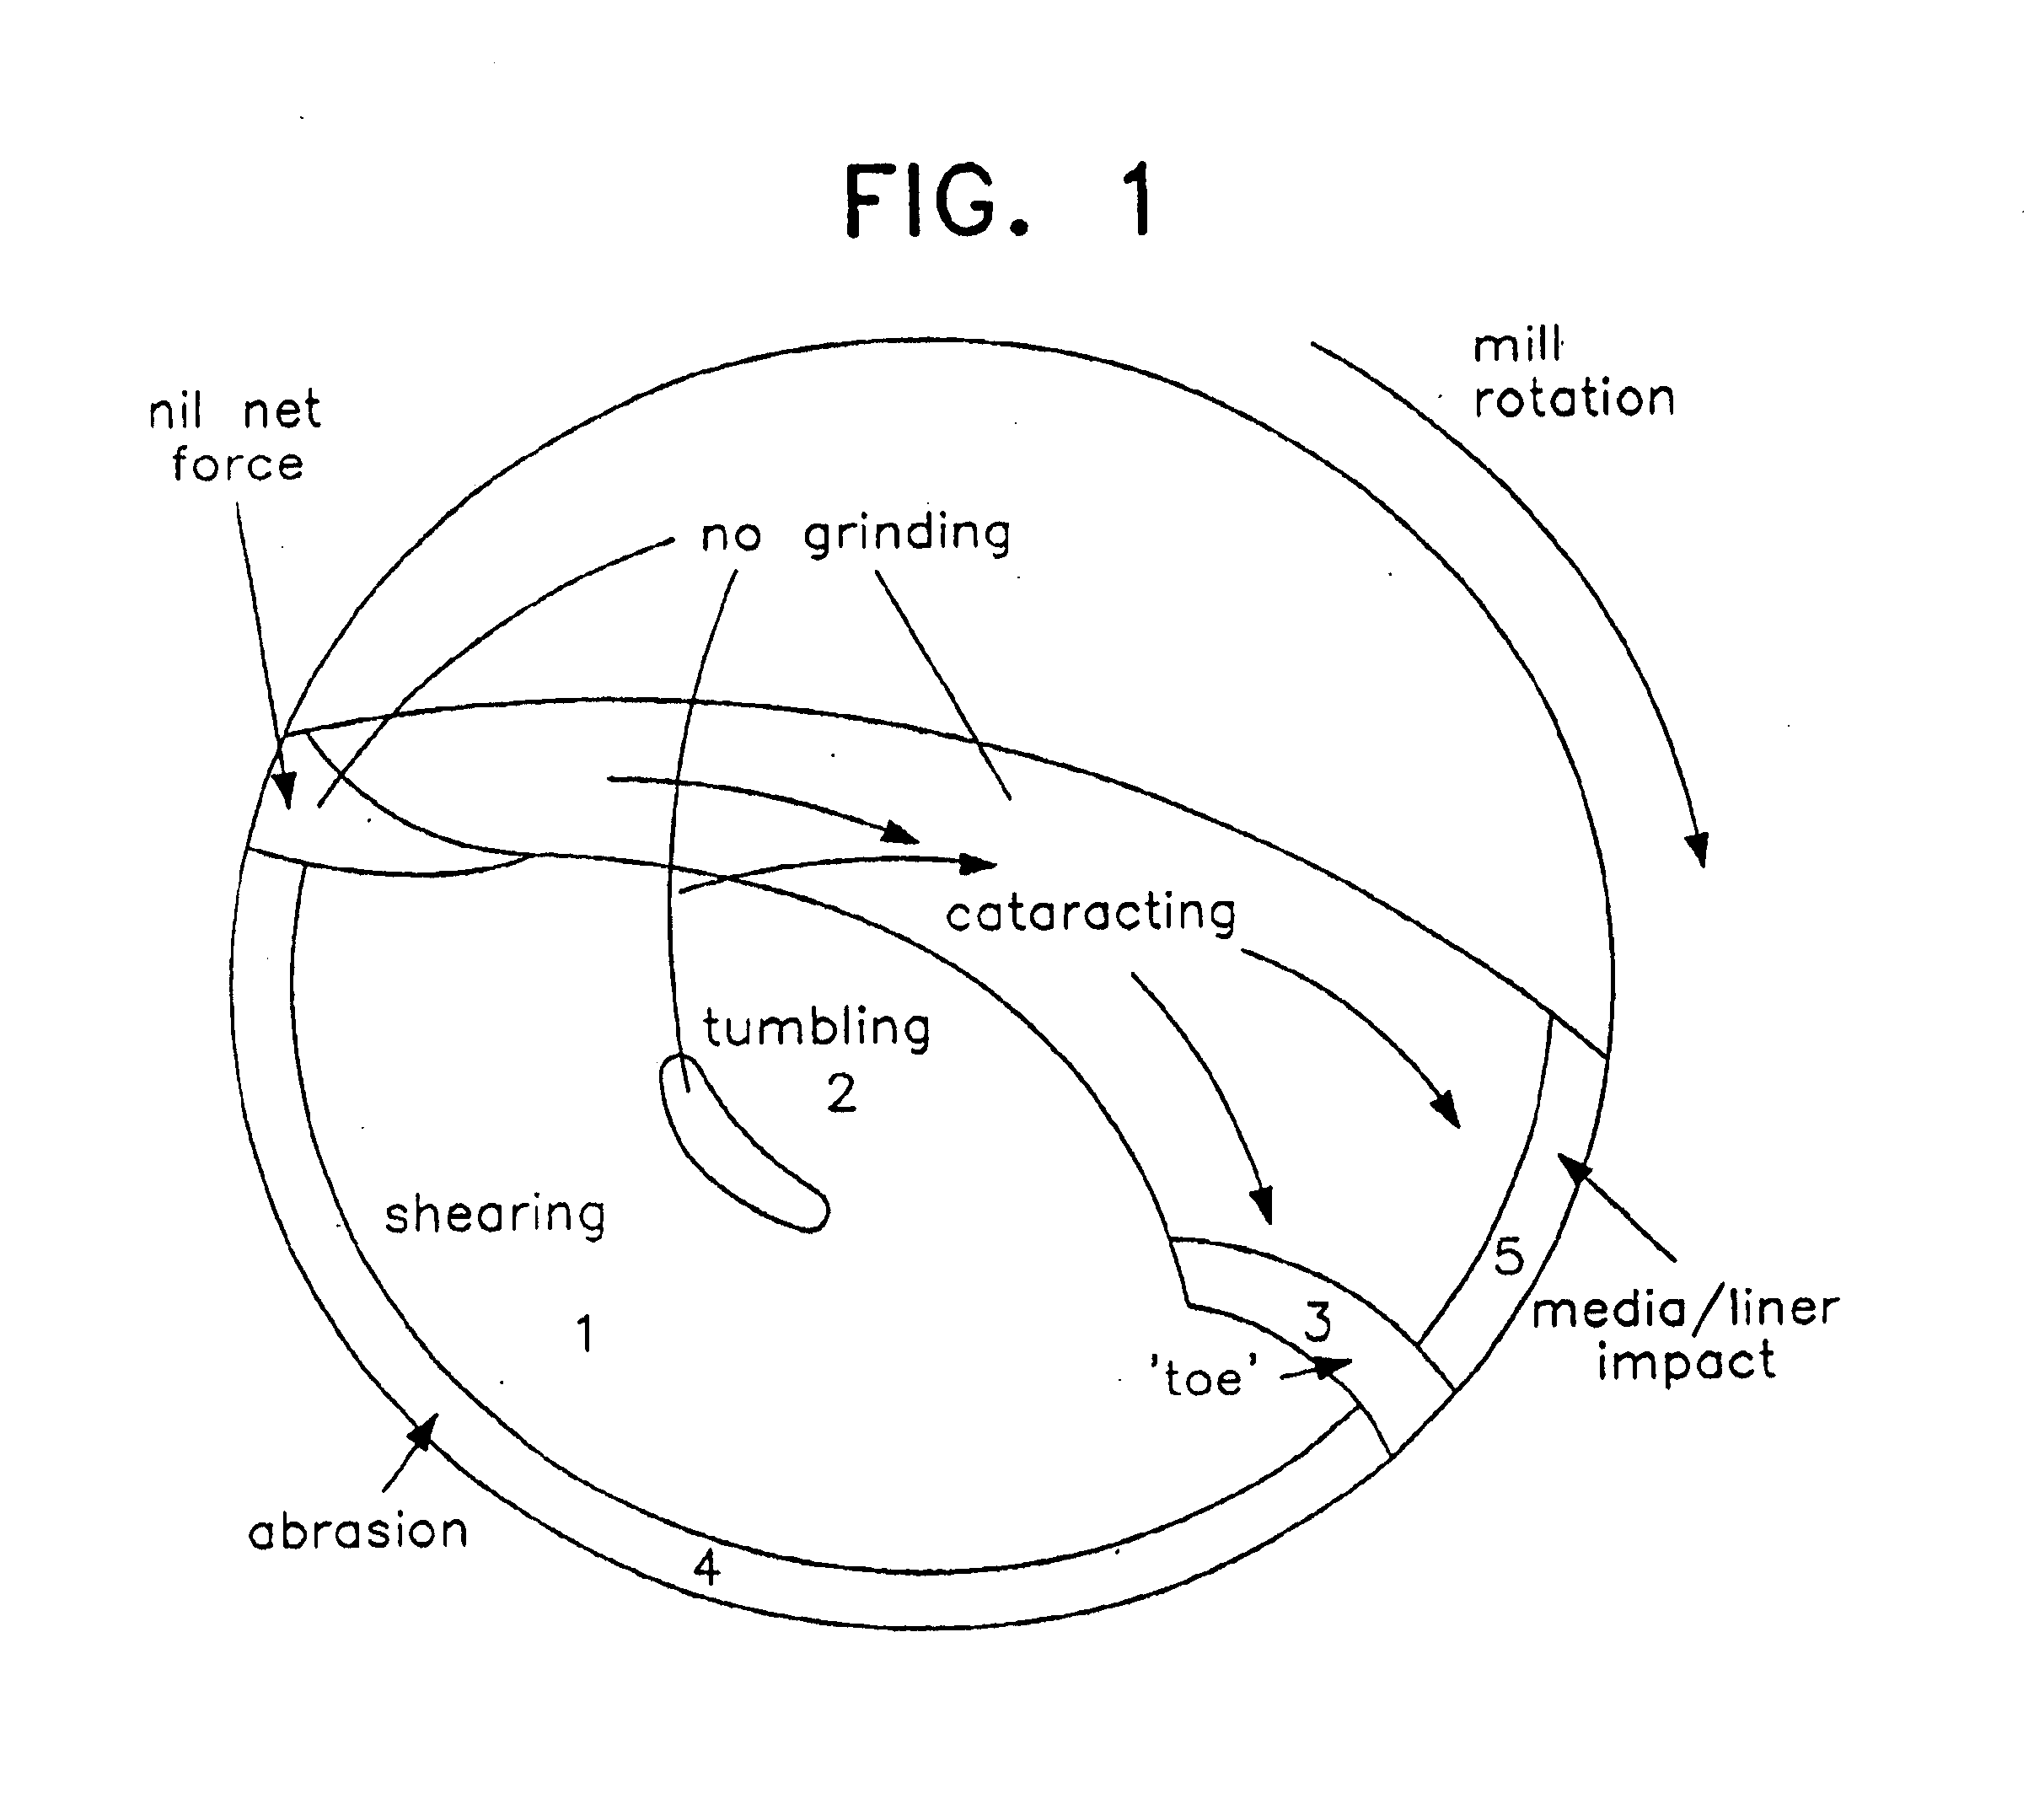 System for monitoring mechanical waves from a moving machine